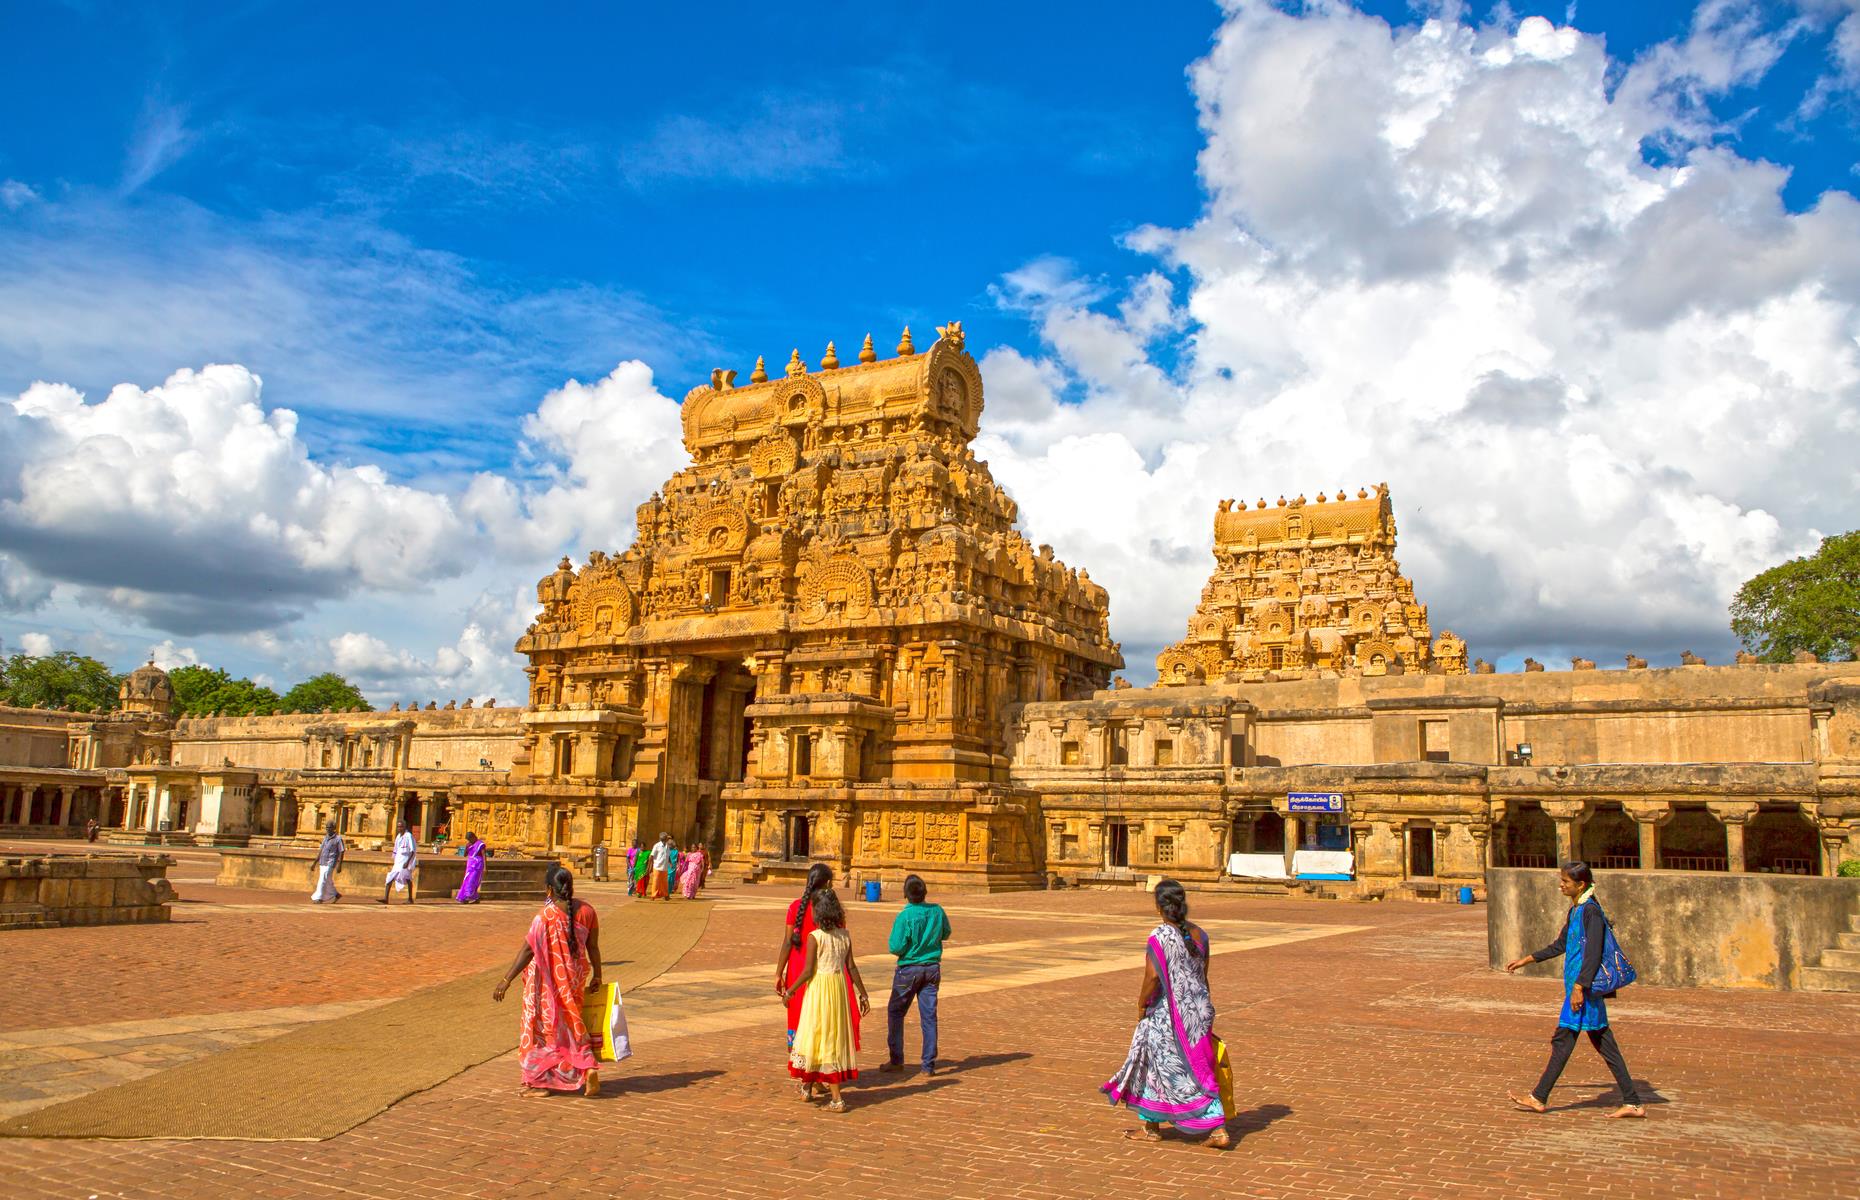 <p>Once the capital of the Chola dynasty, Thanjavur (formerly Tanjore) is home to many magnificent architectural monuments but most notably the Brihadeshwara Temple (pictured). One of India’s finest ancient temples, it was built by Rajaraja Chola I in the 11th century and is dedicated to the god Shiva.</p>  <p>It's packed with examples of the ancient dynasty’s elaborate architecture.</p>